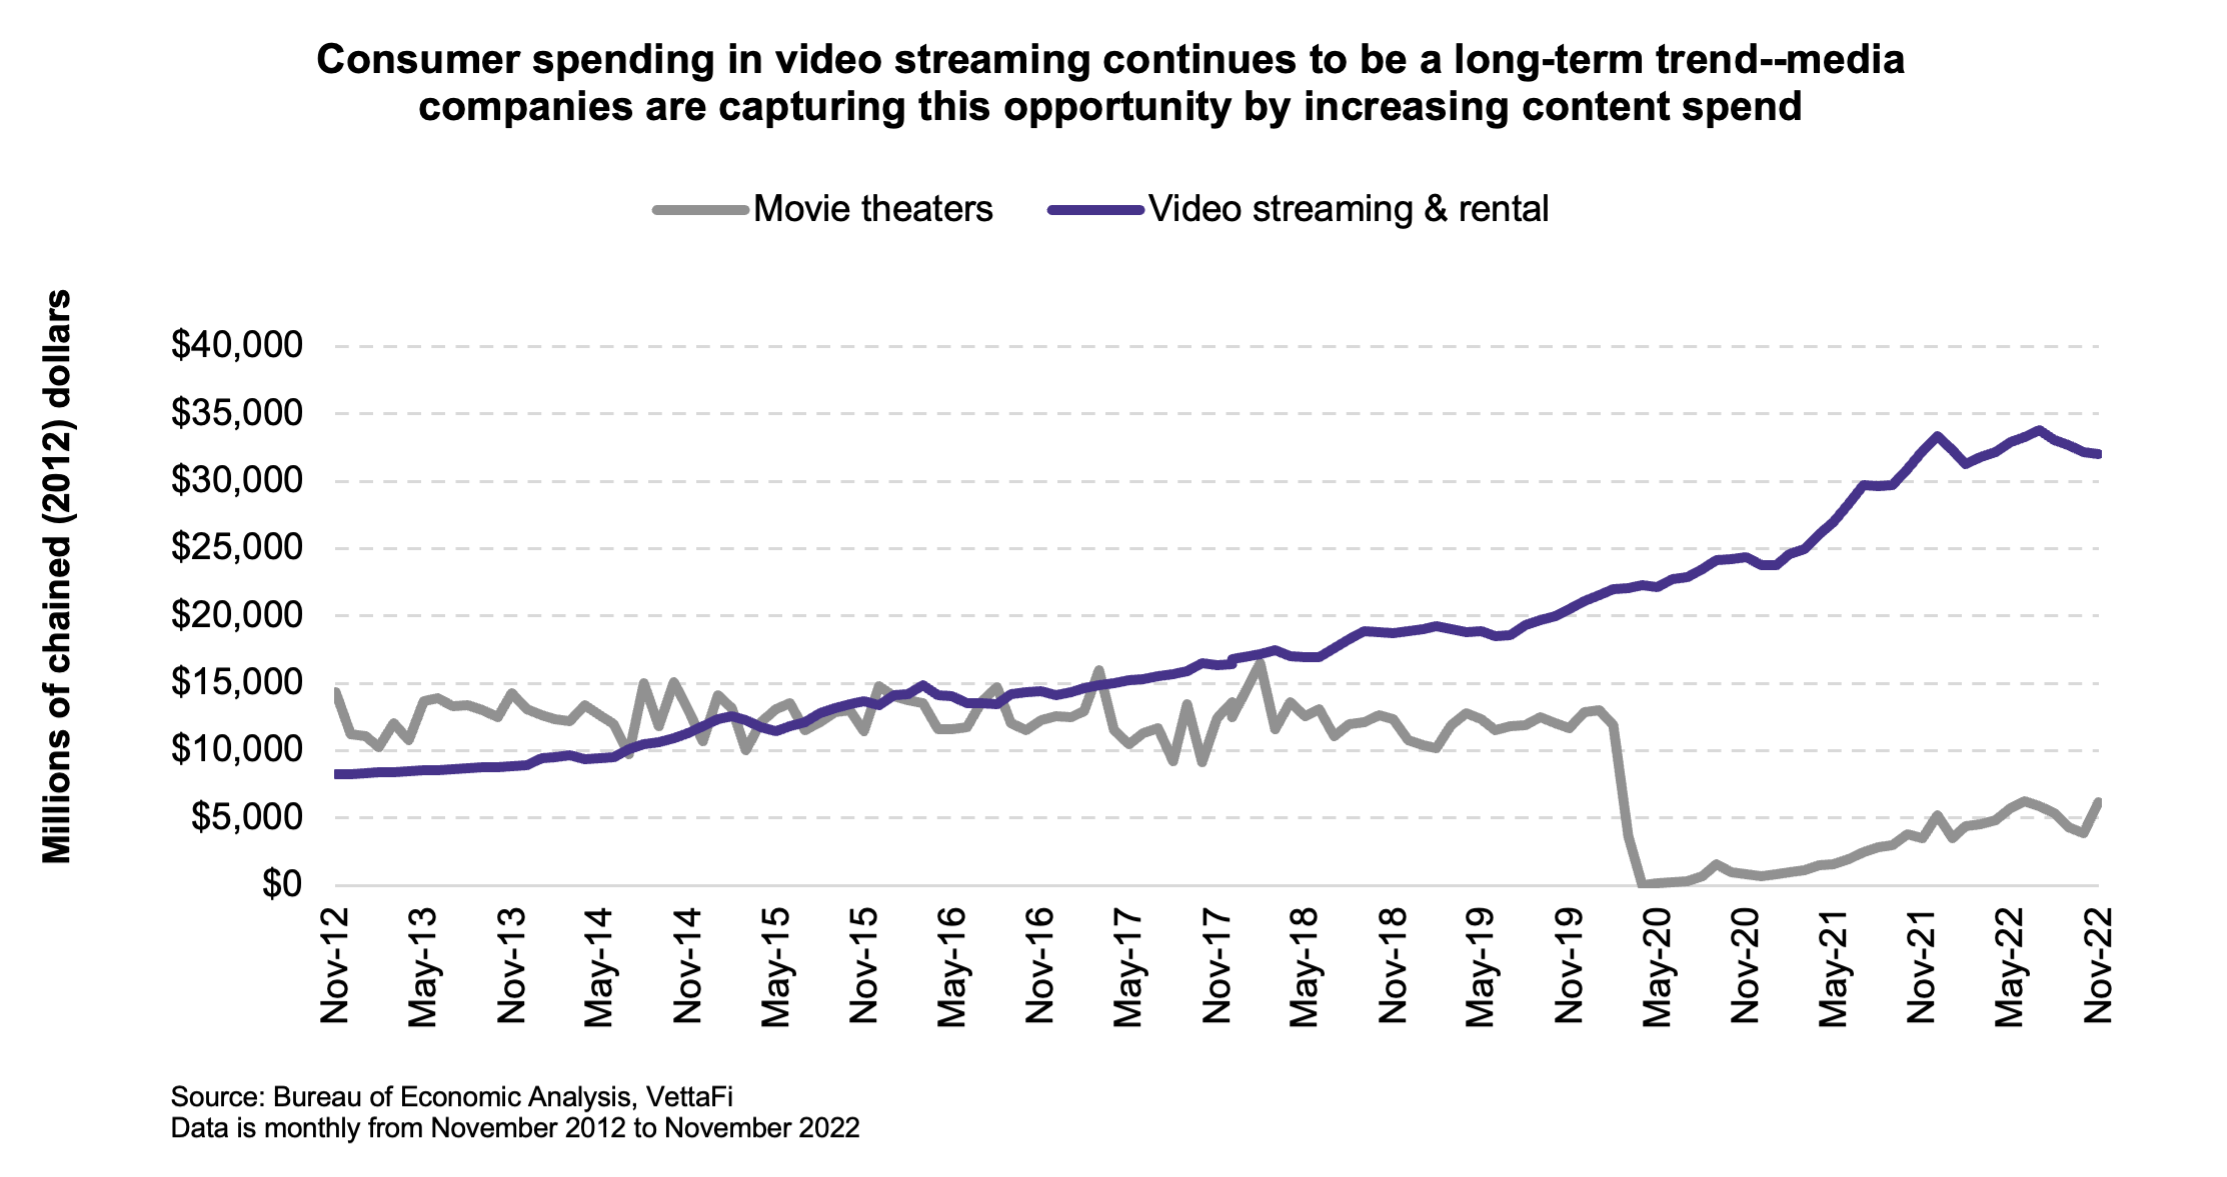 Streaming platforms: How has your growth been over the years?